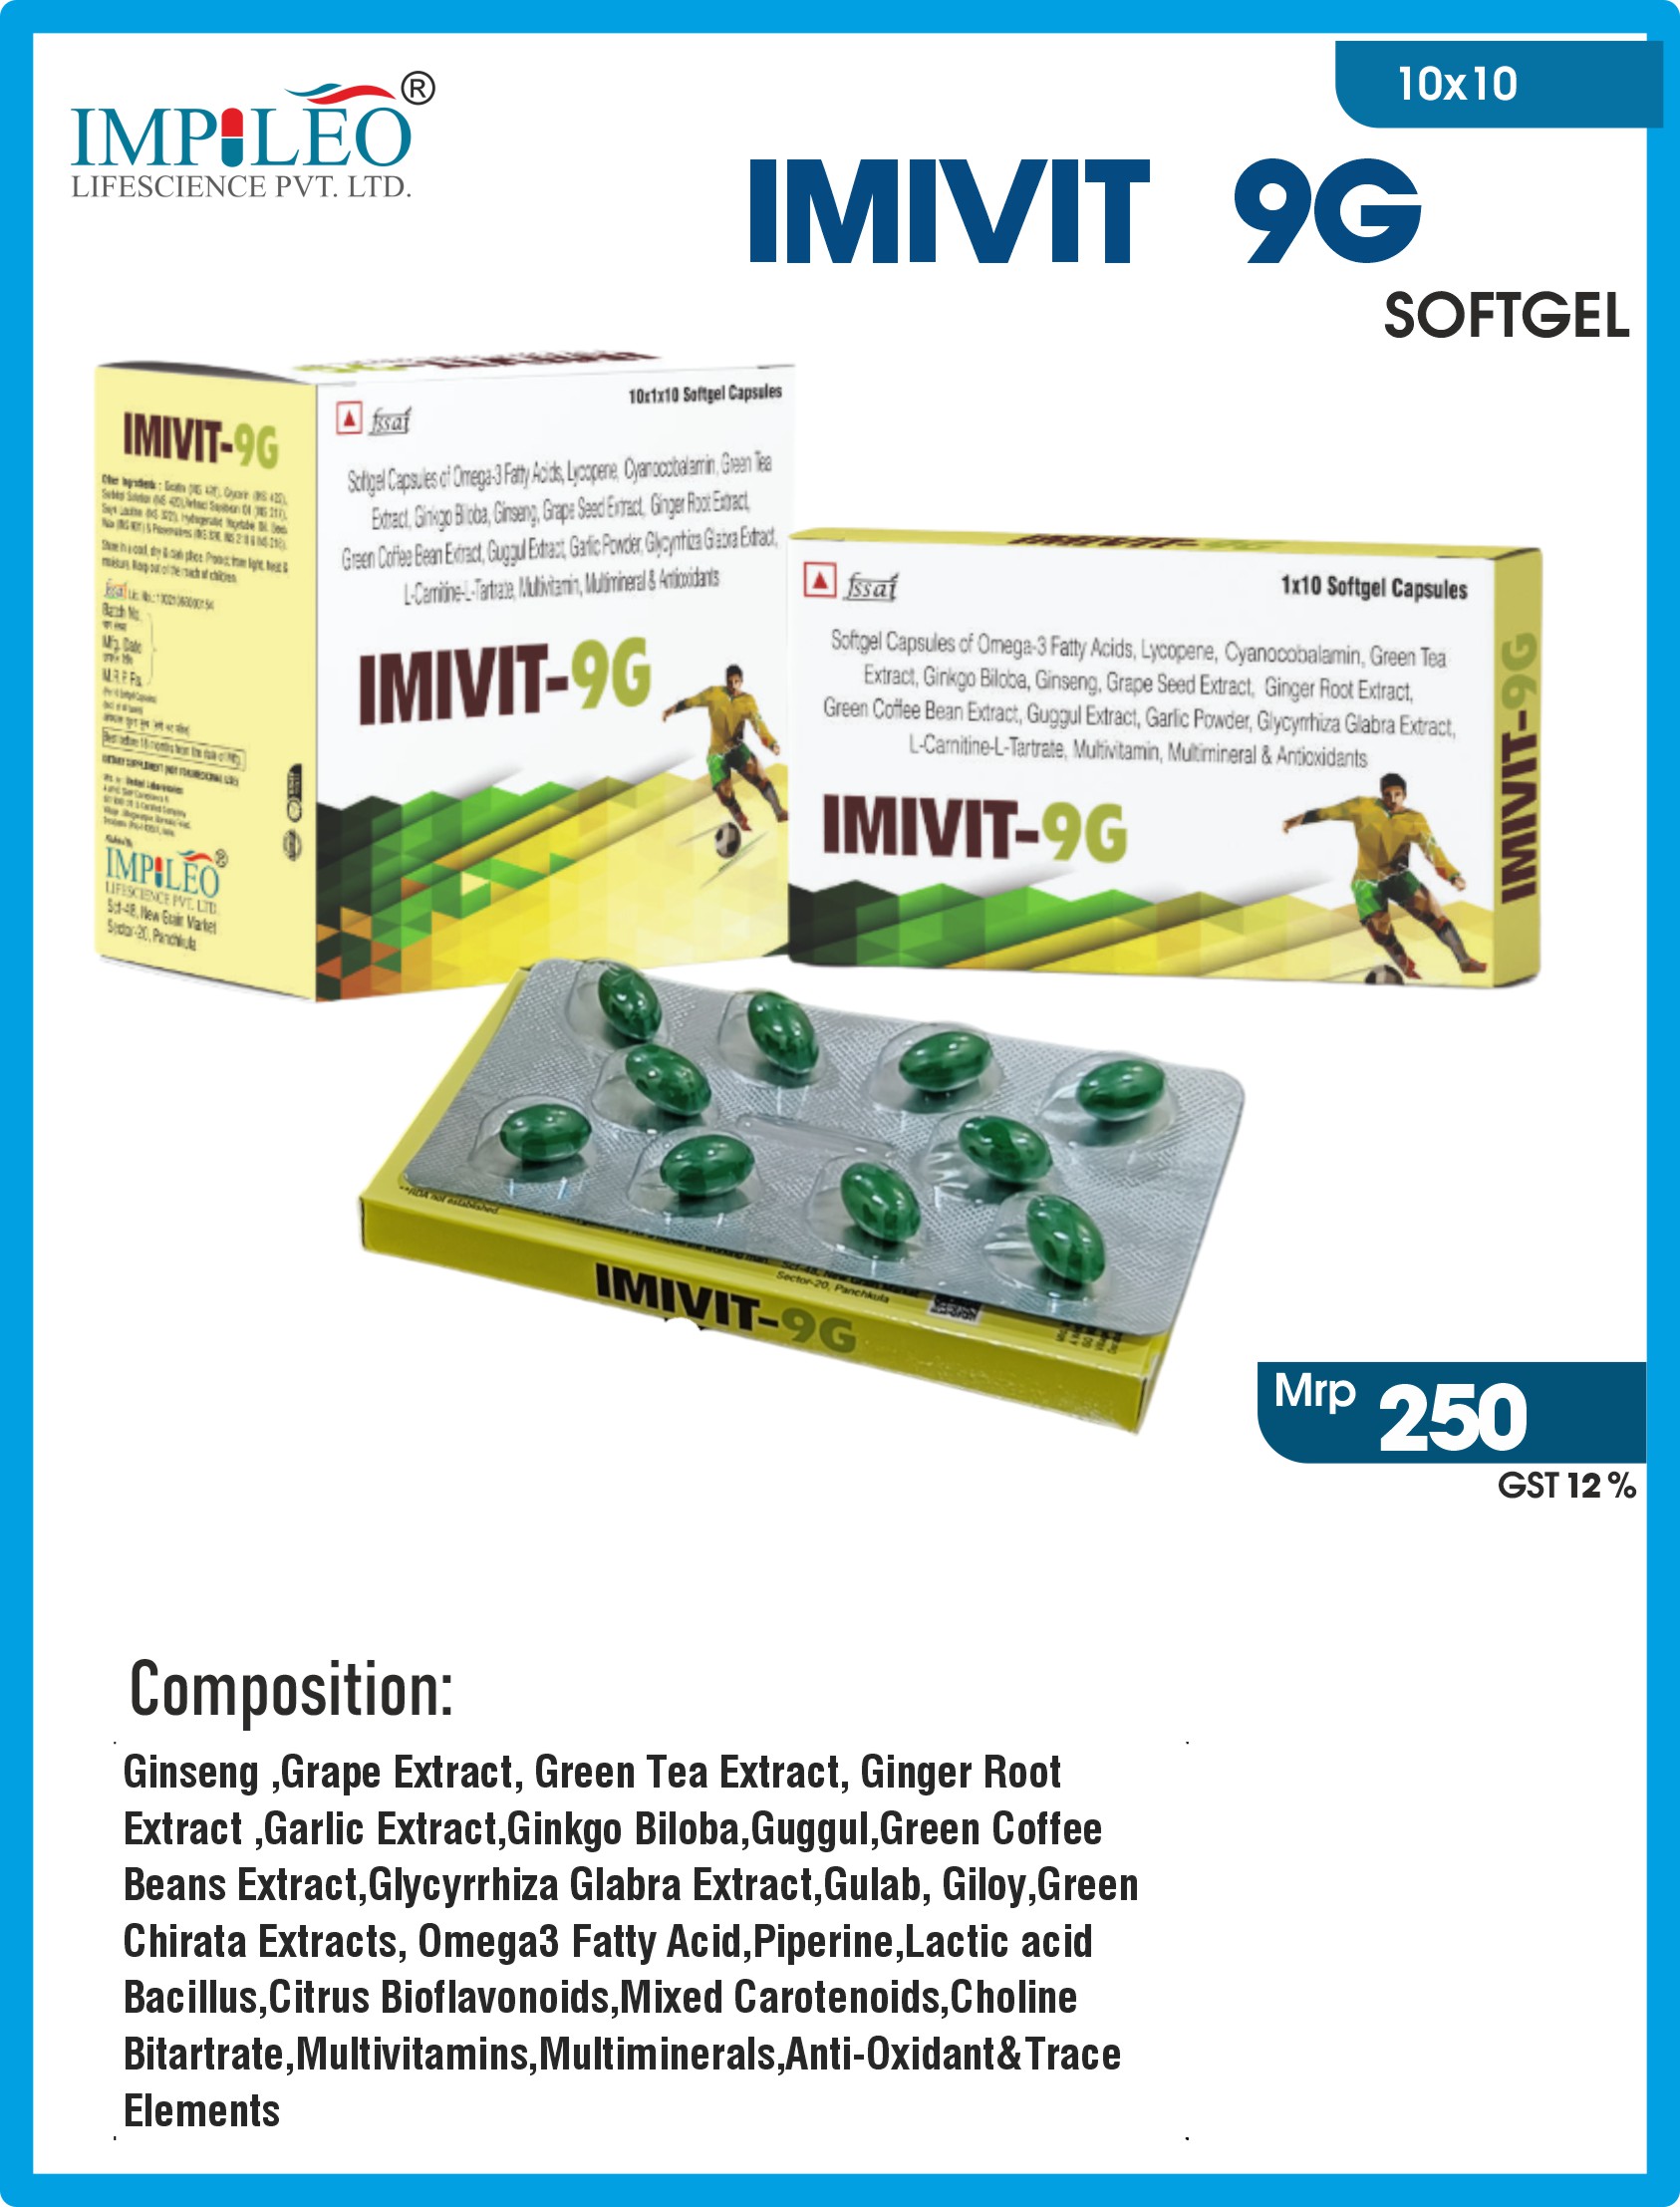 Enhancing Health with IMIVIT 9G Softgel Capsules: Trusted Production Partners through PCD Pharma Franchise in India